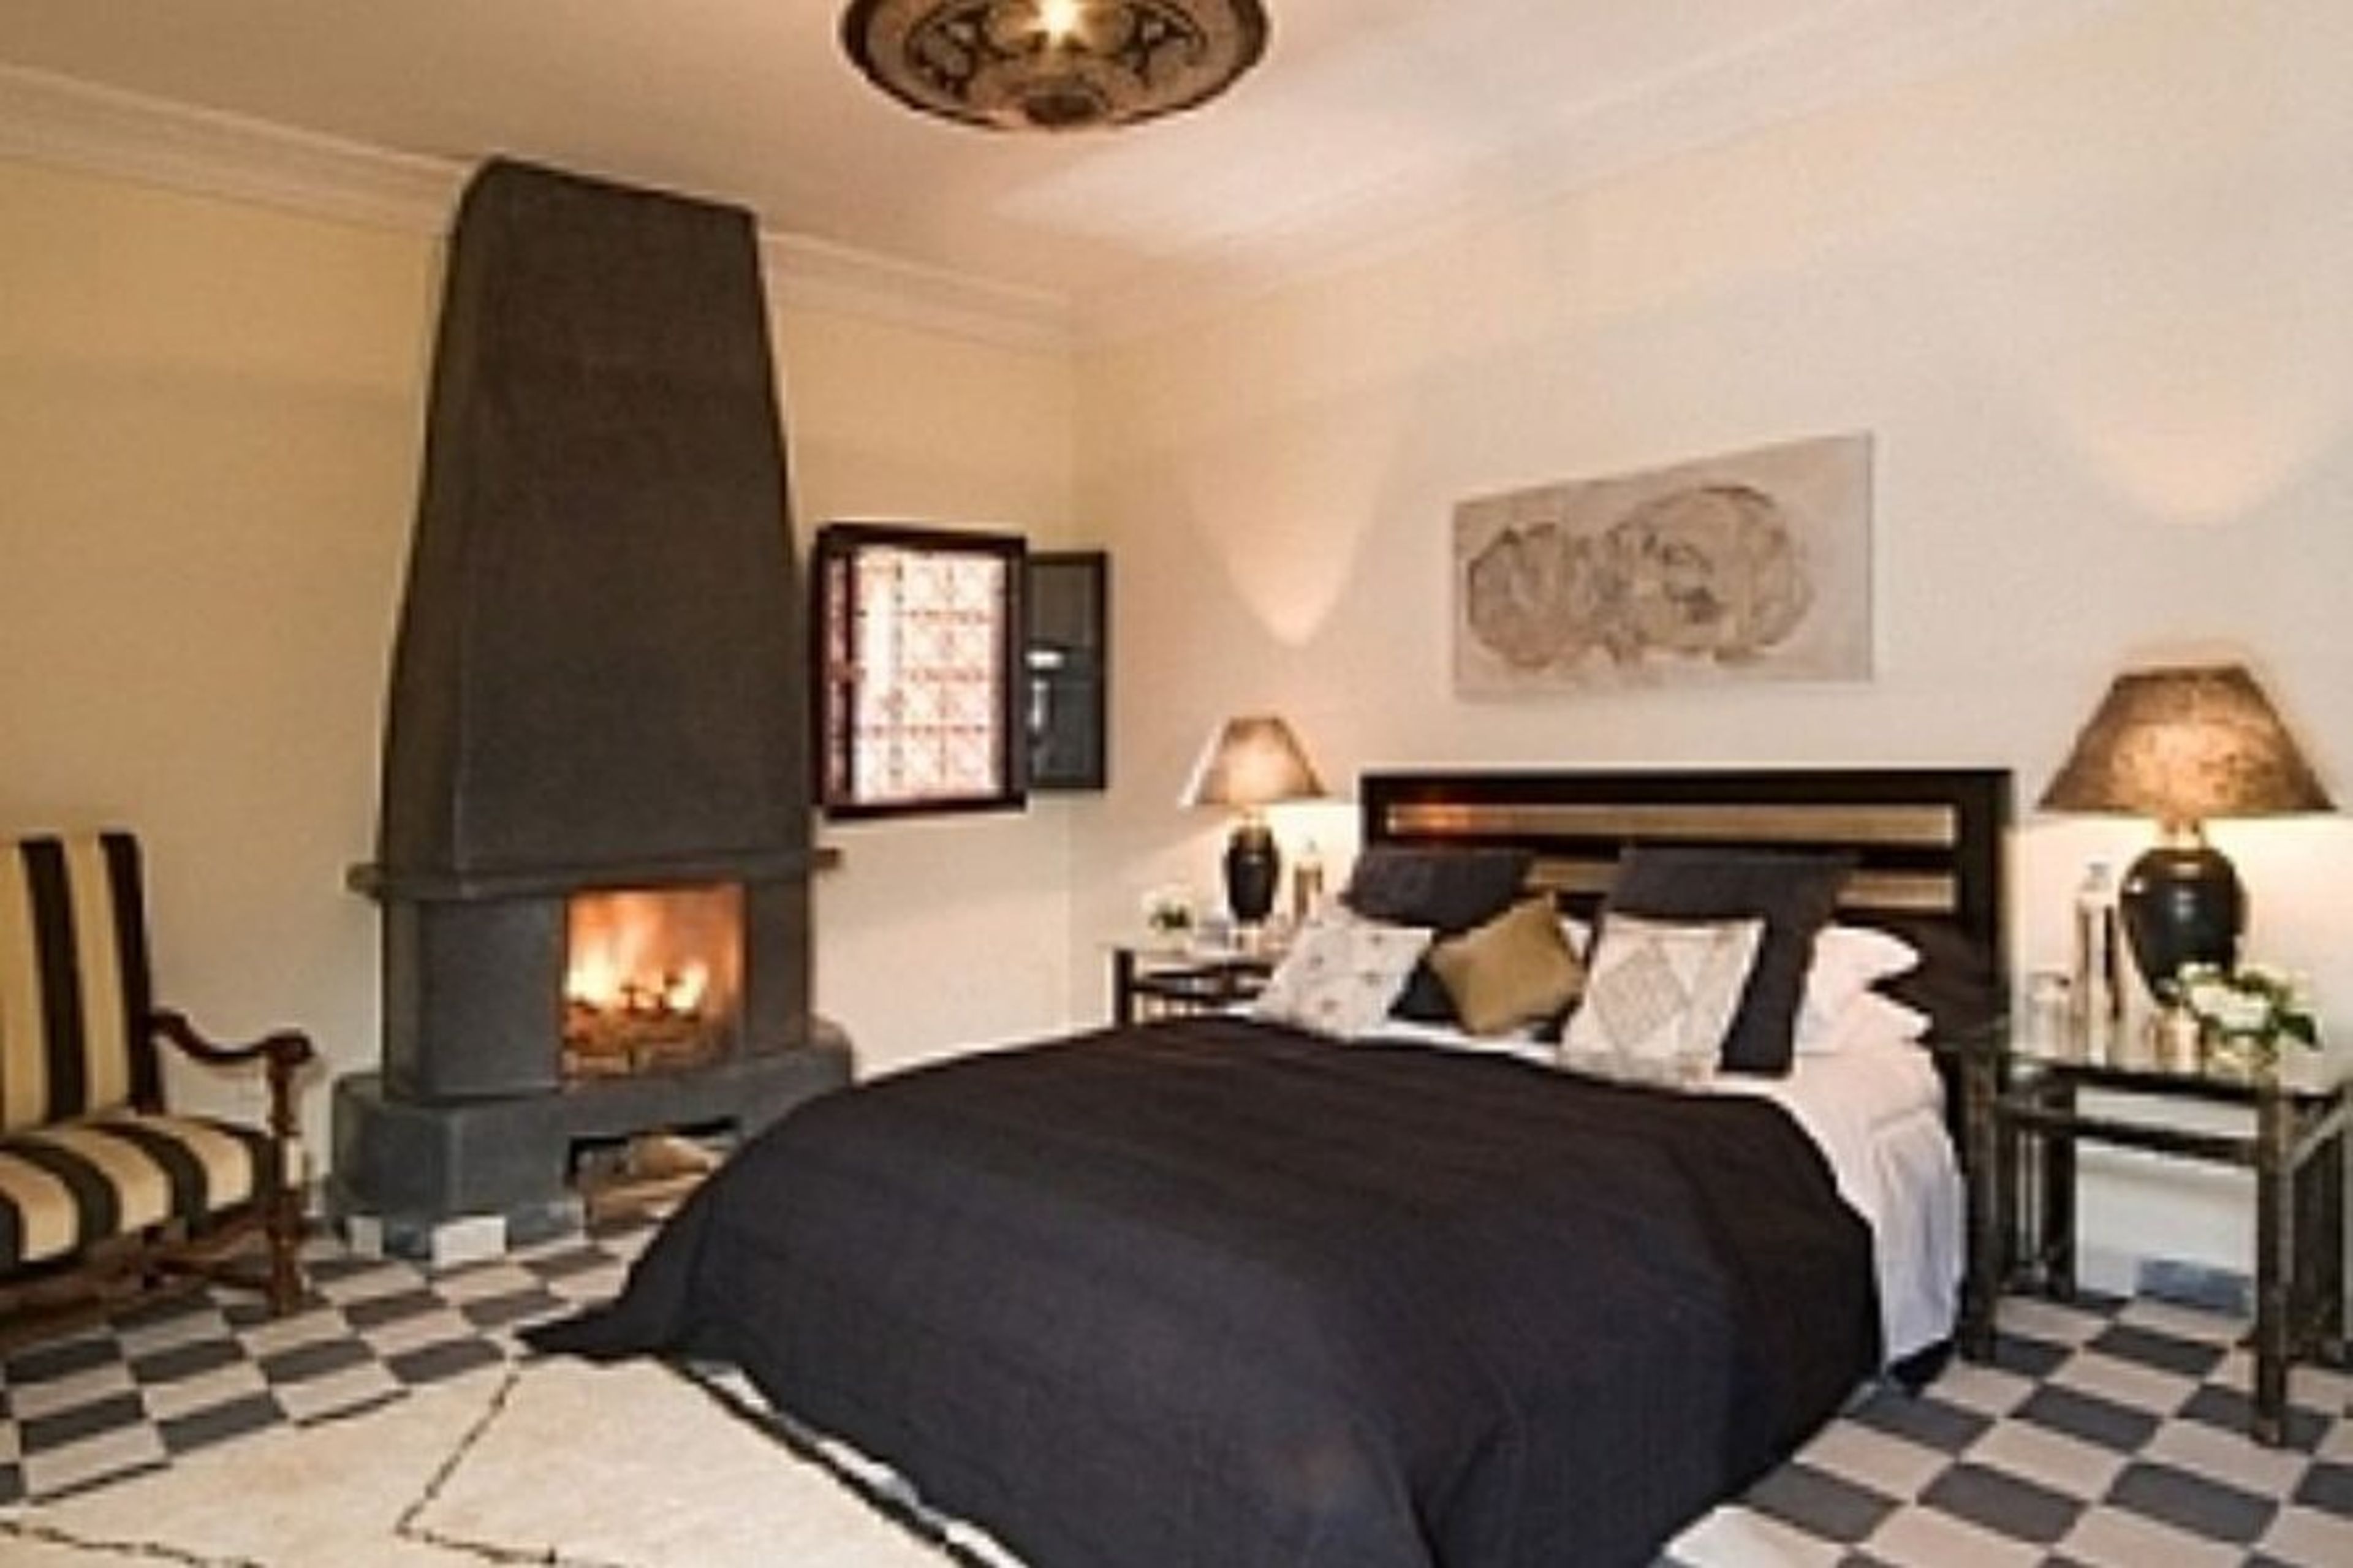 Bedroom with open fire place